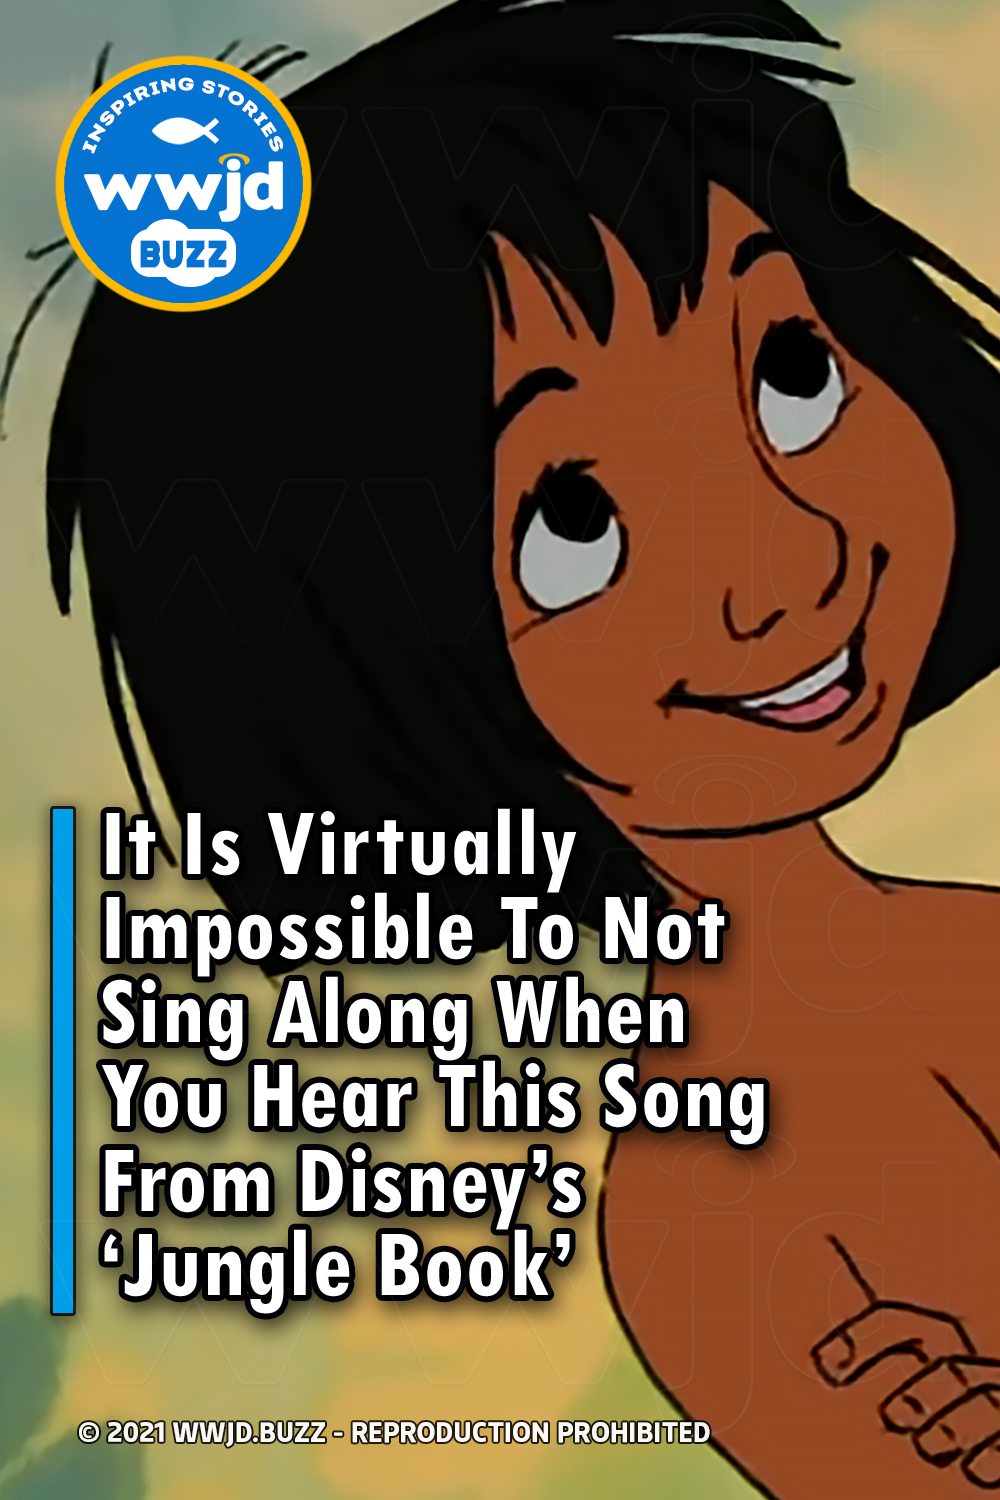 It Is Virtually Impossible To Not Sing Along When You Hear This Song From Disney\'s \'Jungle Book\'